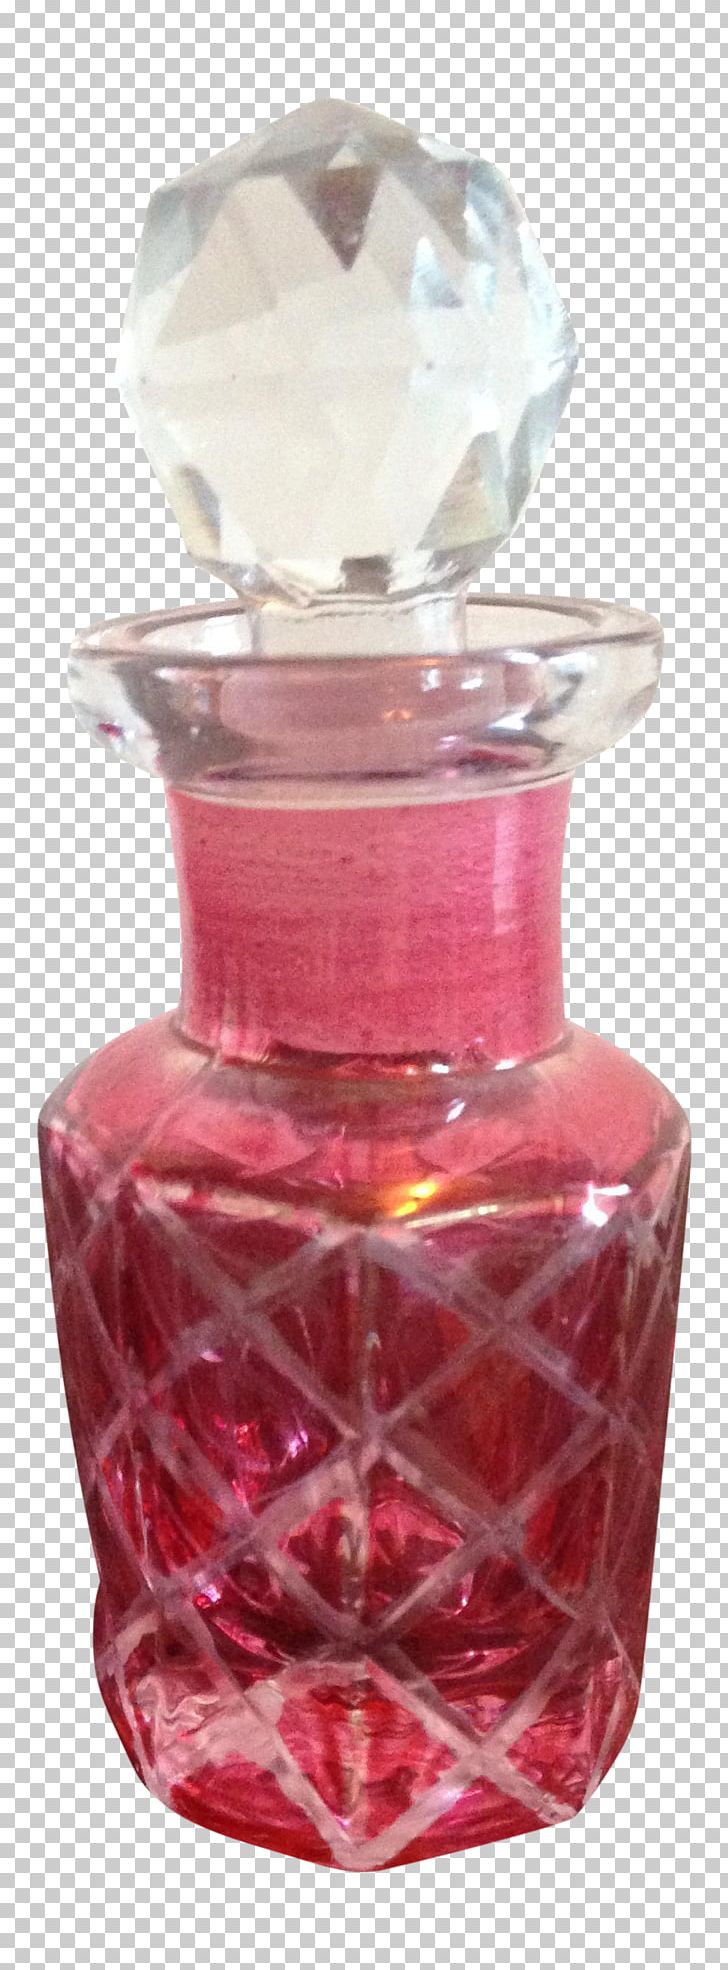 Perfume Glass Bottle Product PNG, Clipart, Bottle, Cosmetics, Glass, Glass Bottle, Magenta Free PNG Download